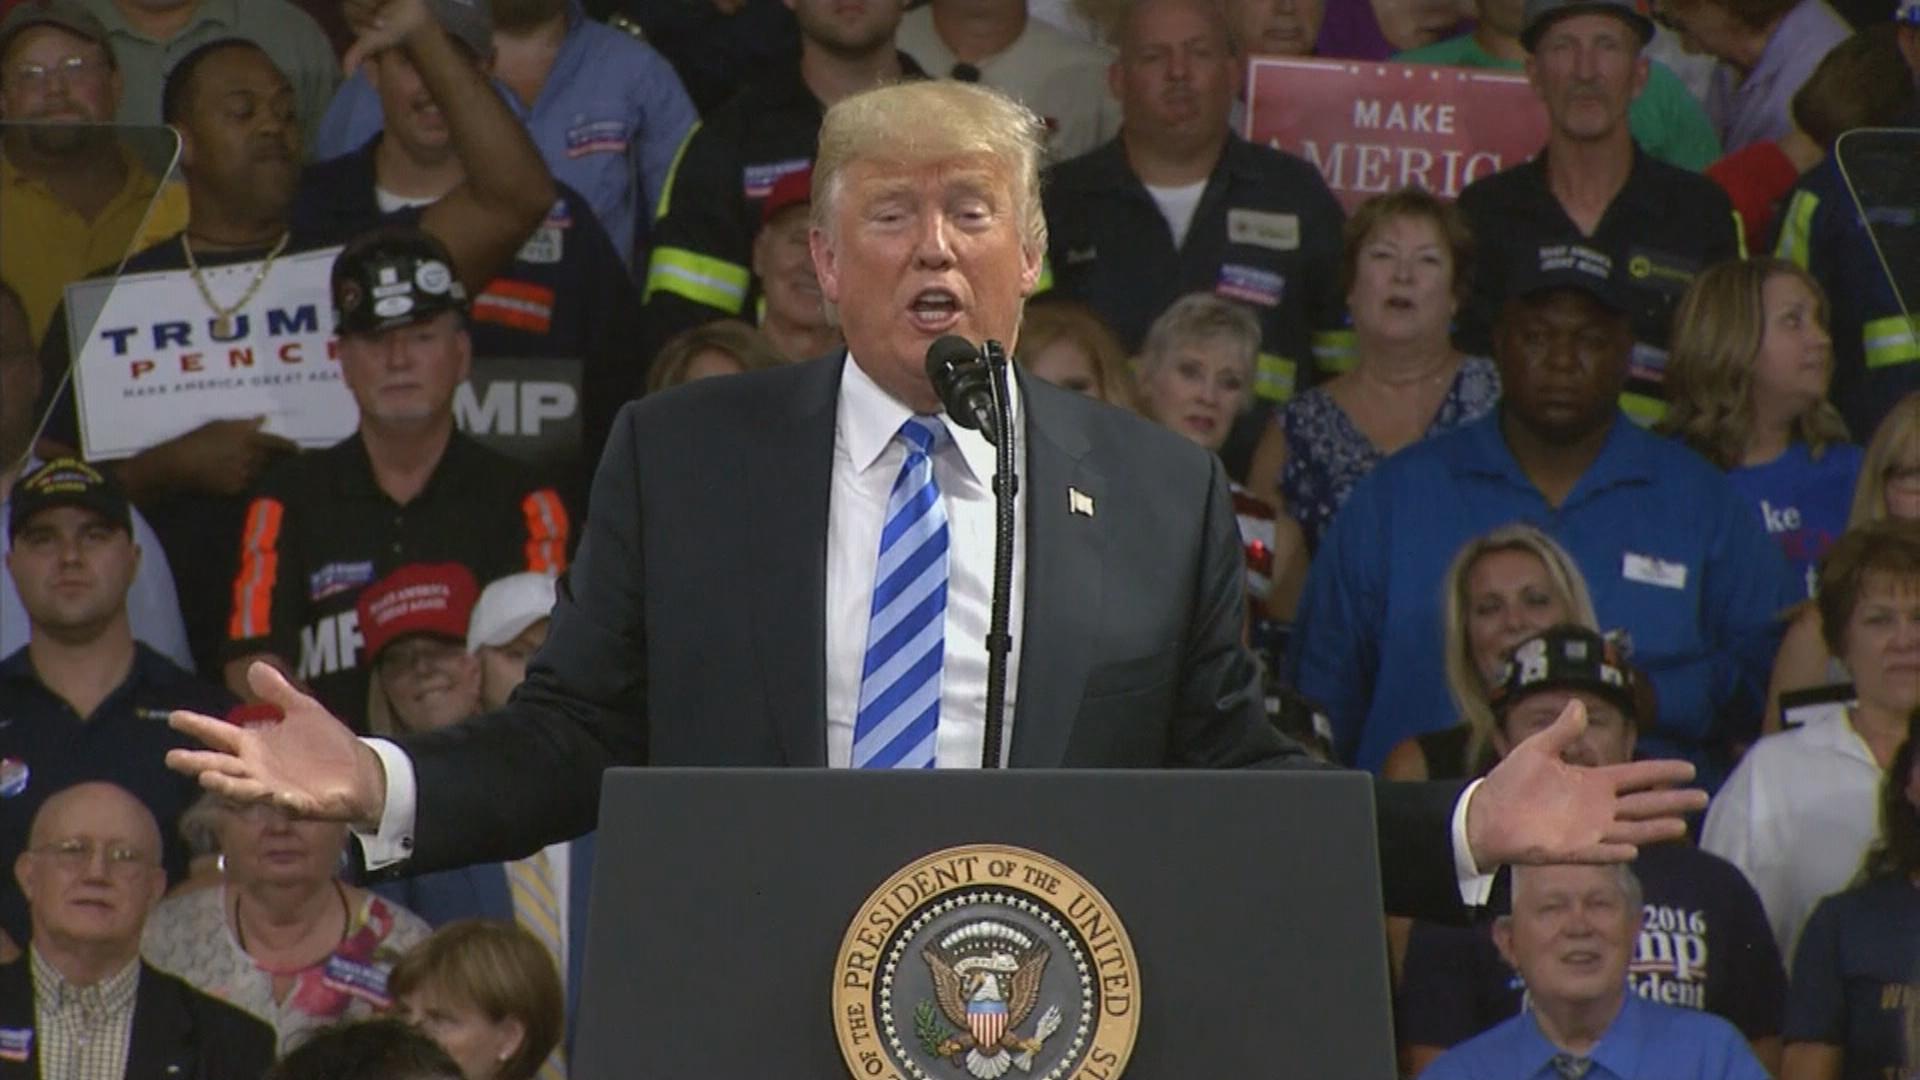 President Donald Trump holds a rally in West Virginia on Aug. 21, 2018. “You know, they’re still looking for collusion. Where is the collusion?” he asked.